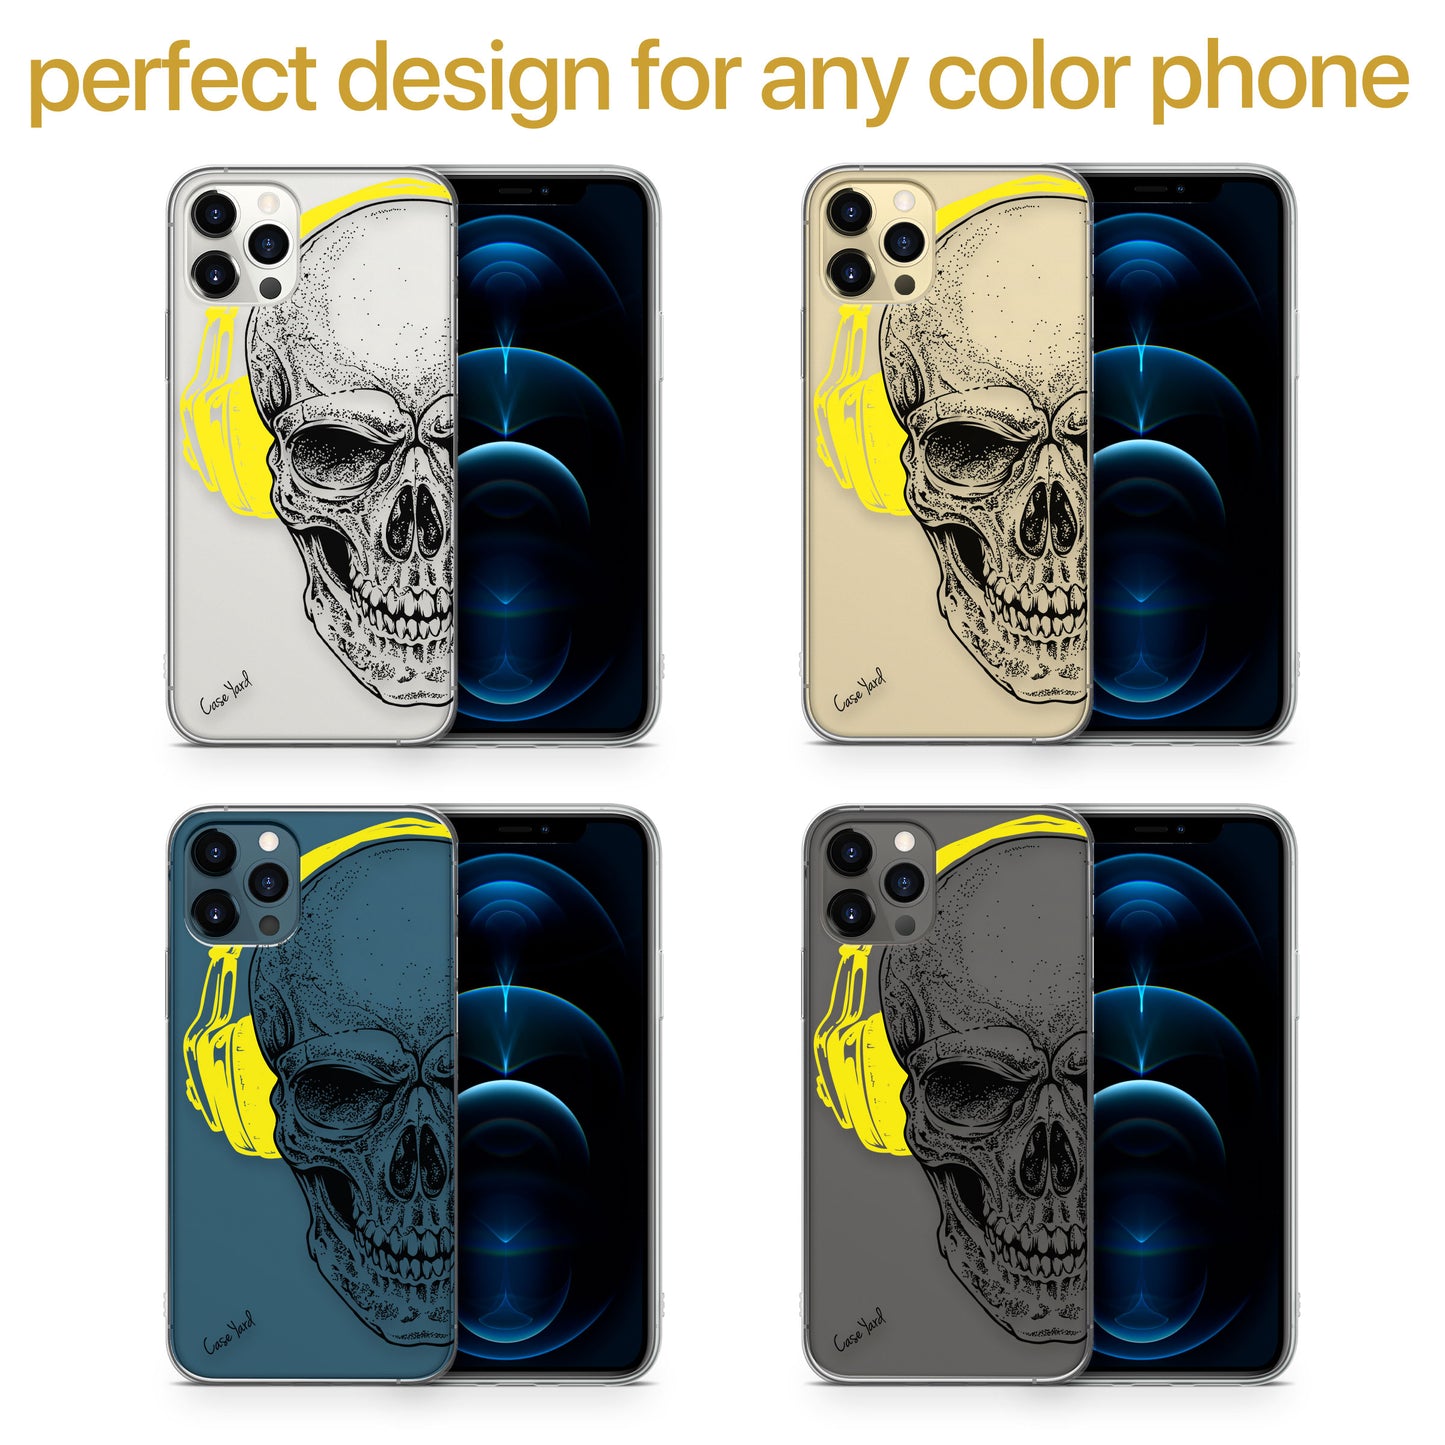 TPU Clear case with (Headphone Skull) Design for iPhone & Samsung Phones